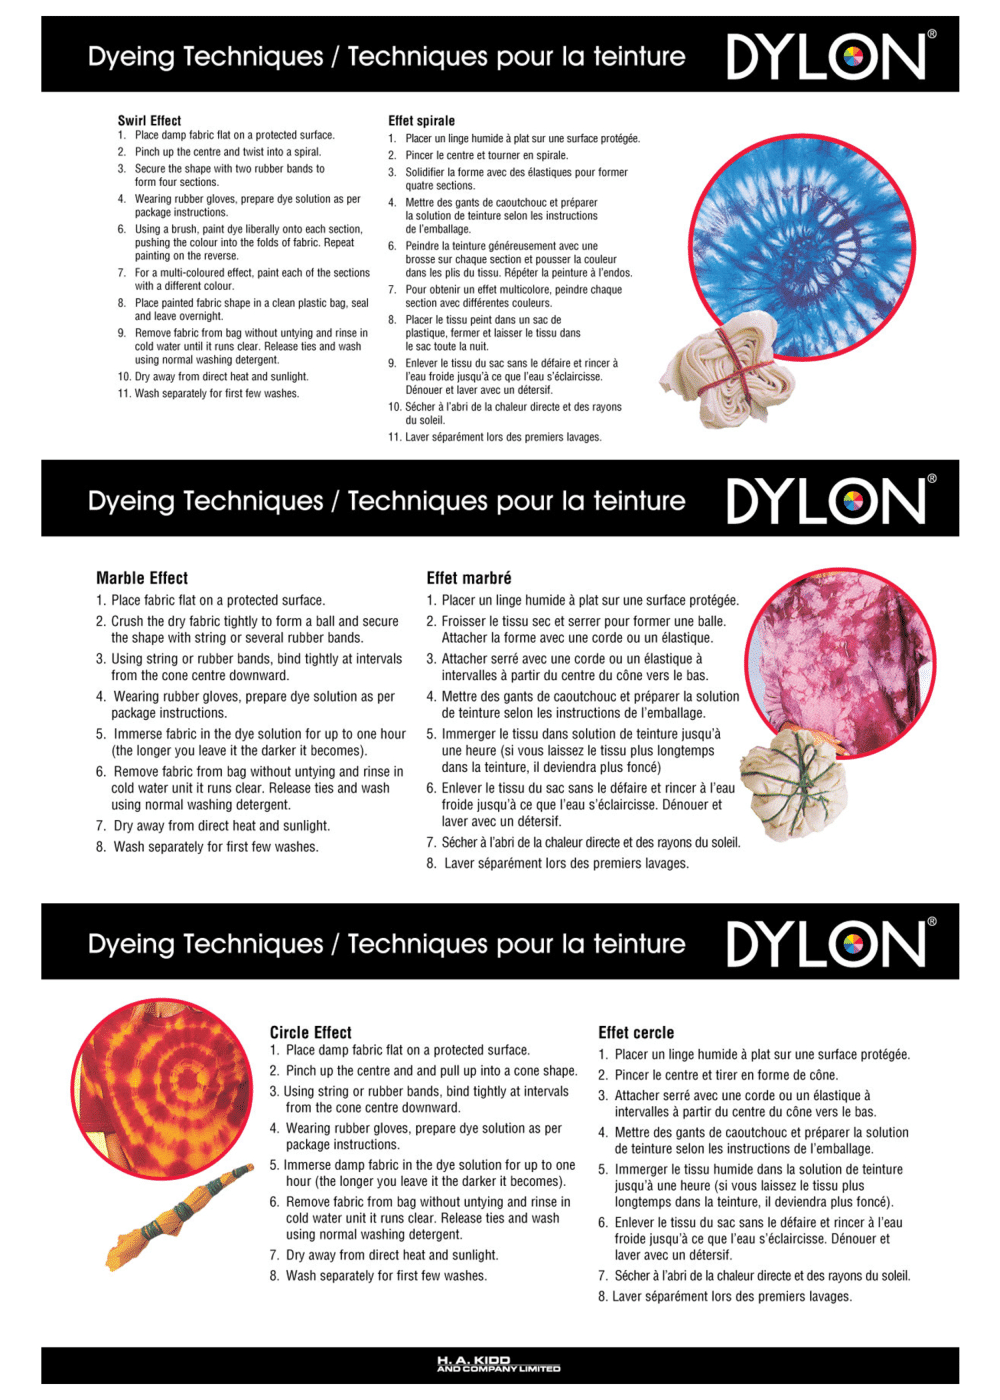 Detailed instruction of how to create swirl, marble & circle effect on fabric using Dylon Dye